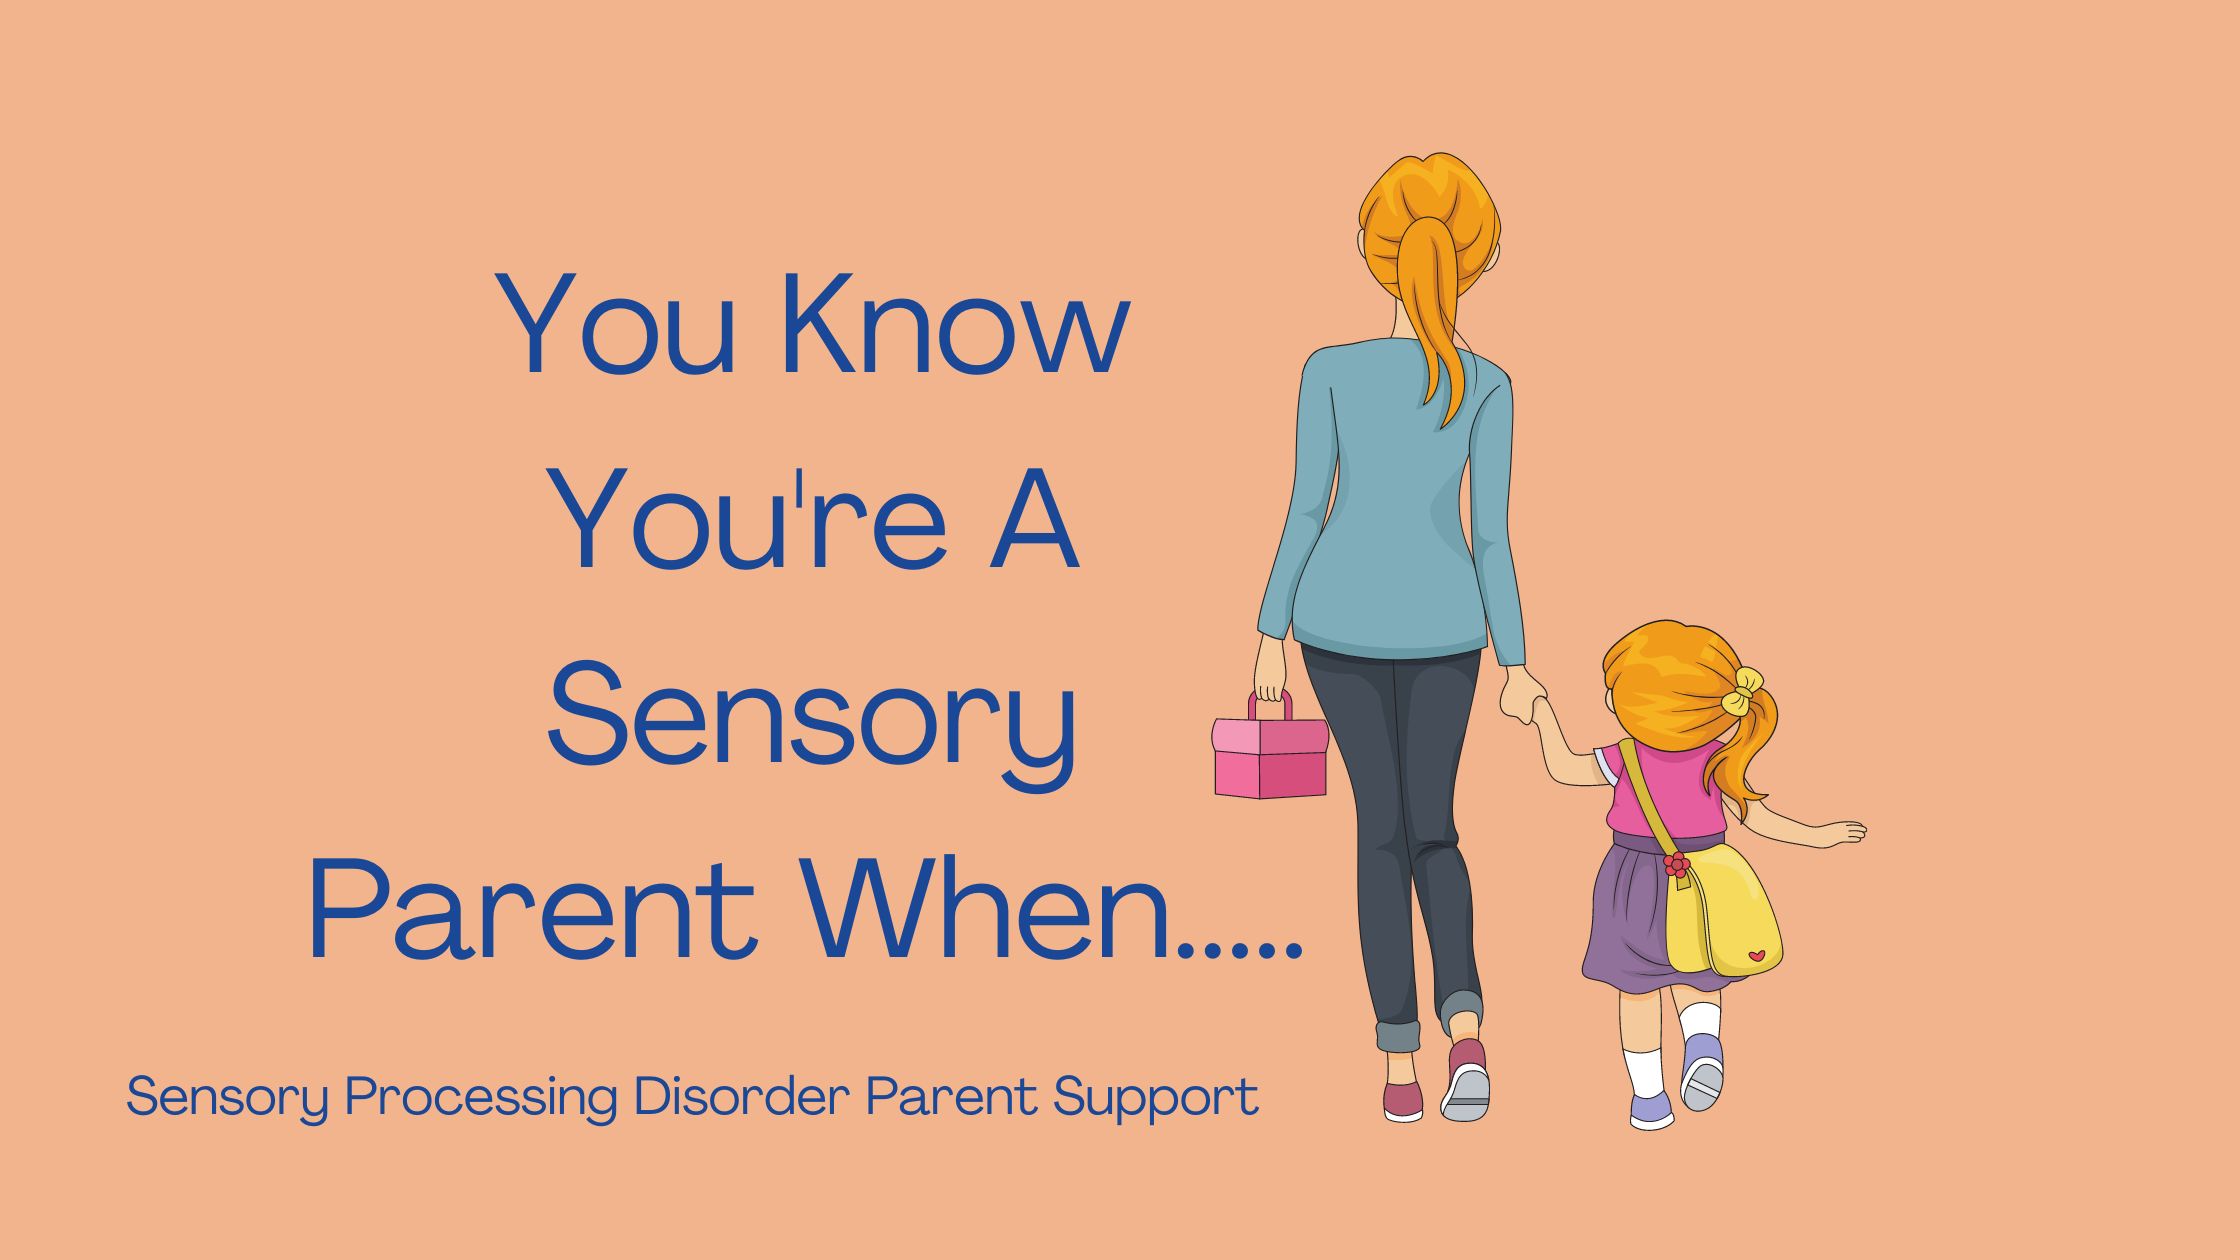 parent walking with child who has sensory processing disorder You Know You're A Sensory Parent When.....